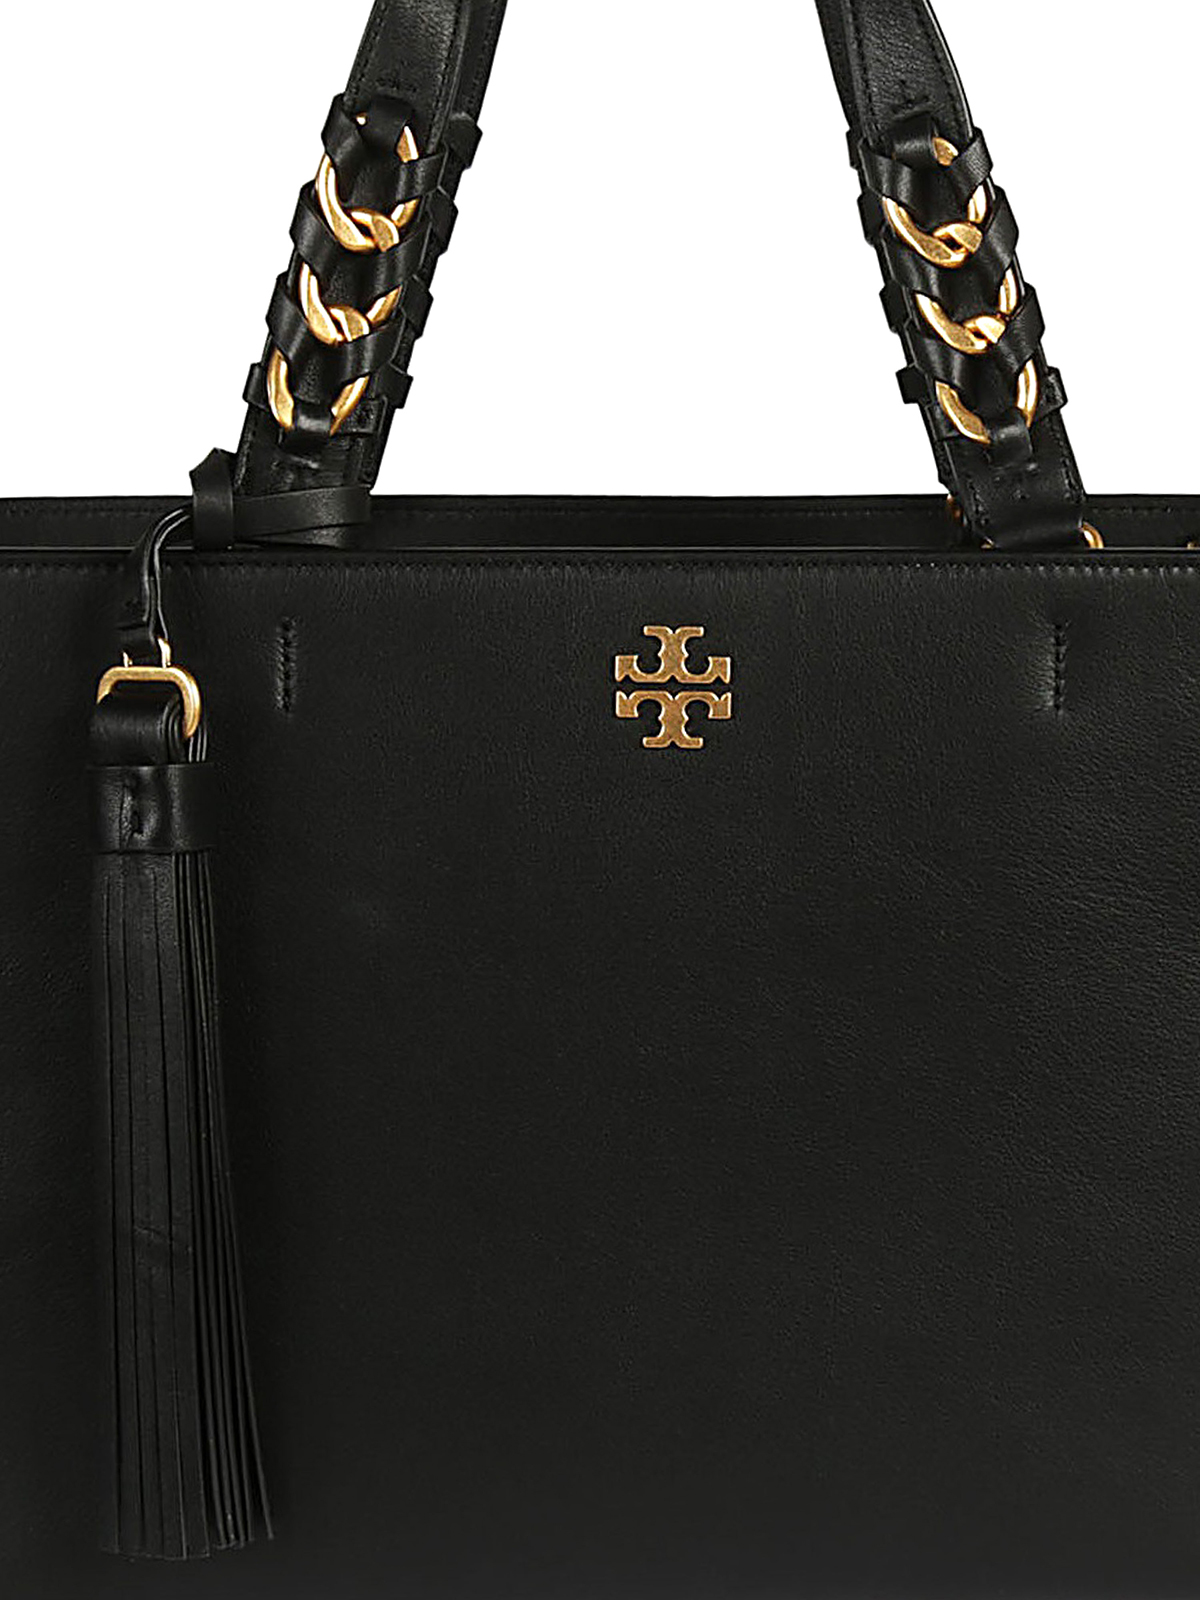 Totes bags Tory Burch - Brooke leather bag - 43652001 